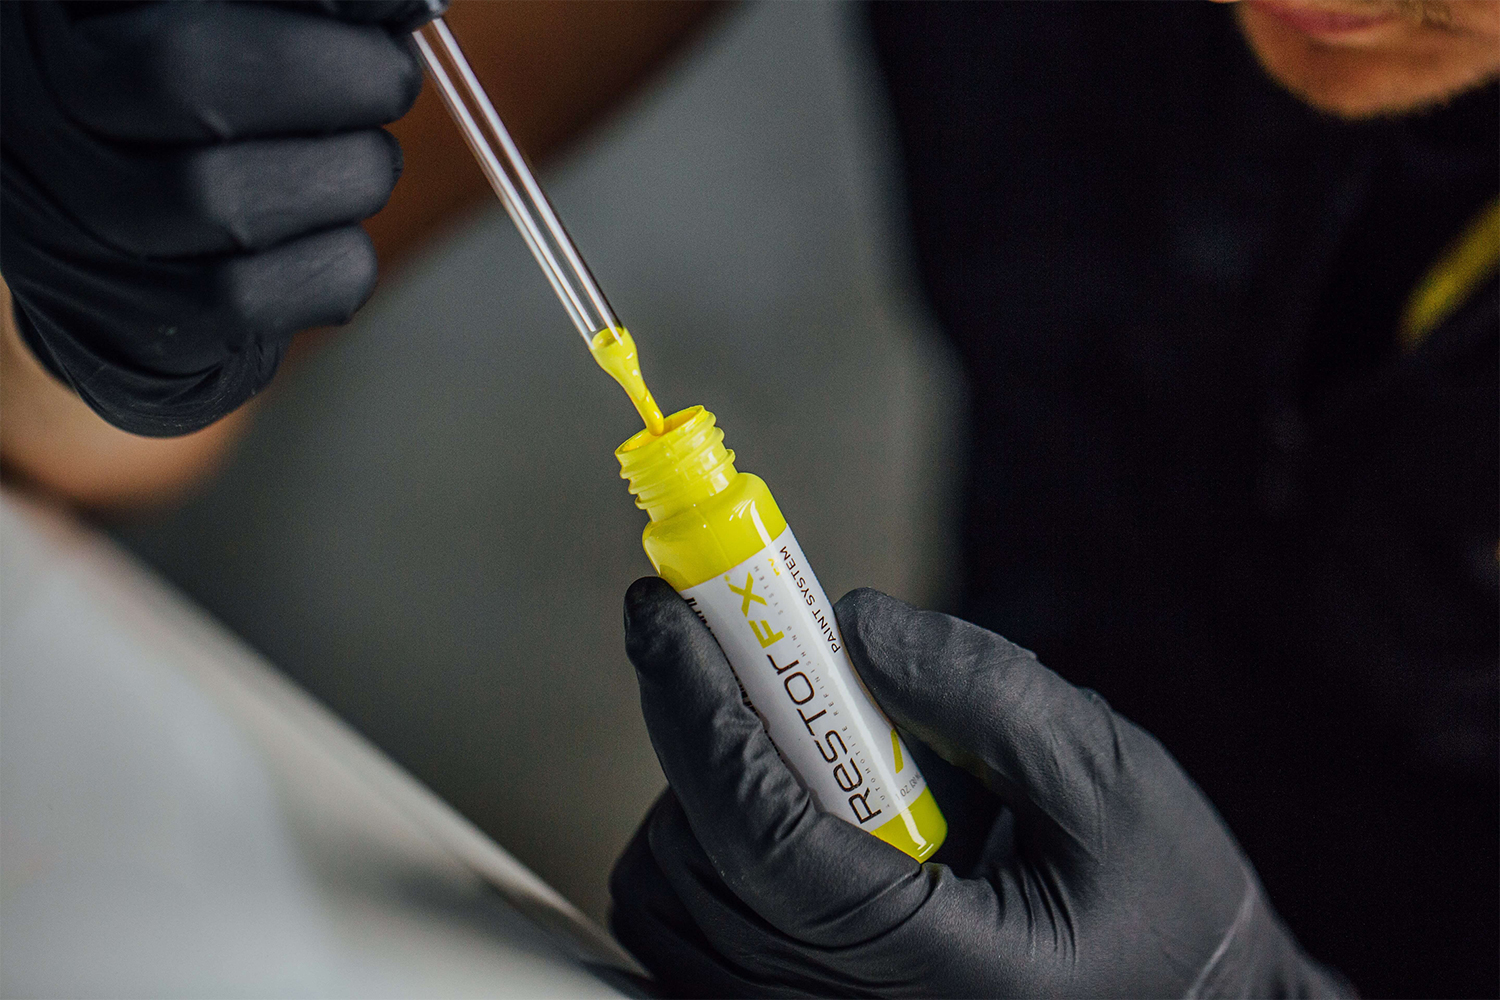 The gloved hands of a RestorFX Technician extracting yellow paint from a RestorFX Paint vial for paint chip repair